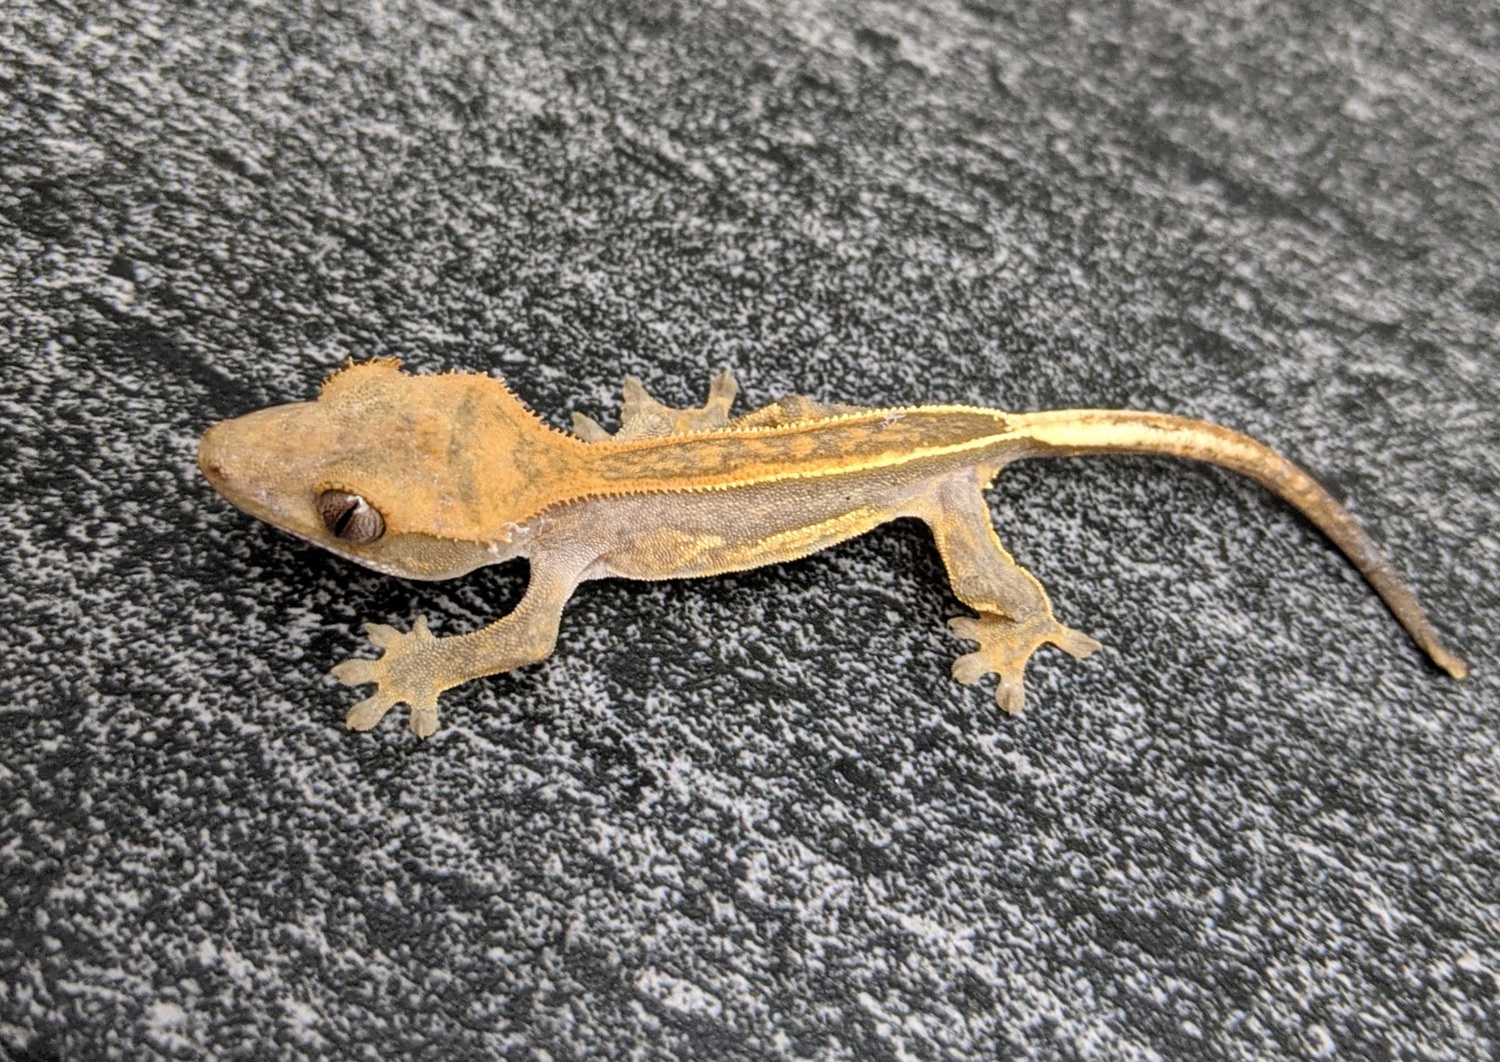 Tangerine Possible Soft Scale Pinstripe Crested Gecko by Zadistic Exoticz